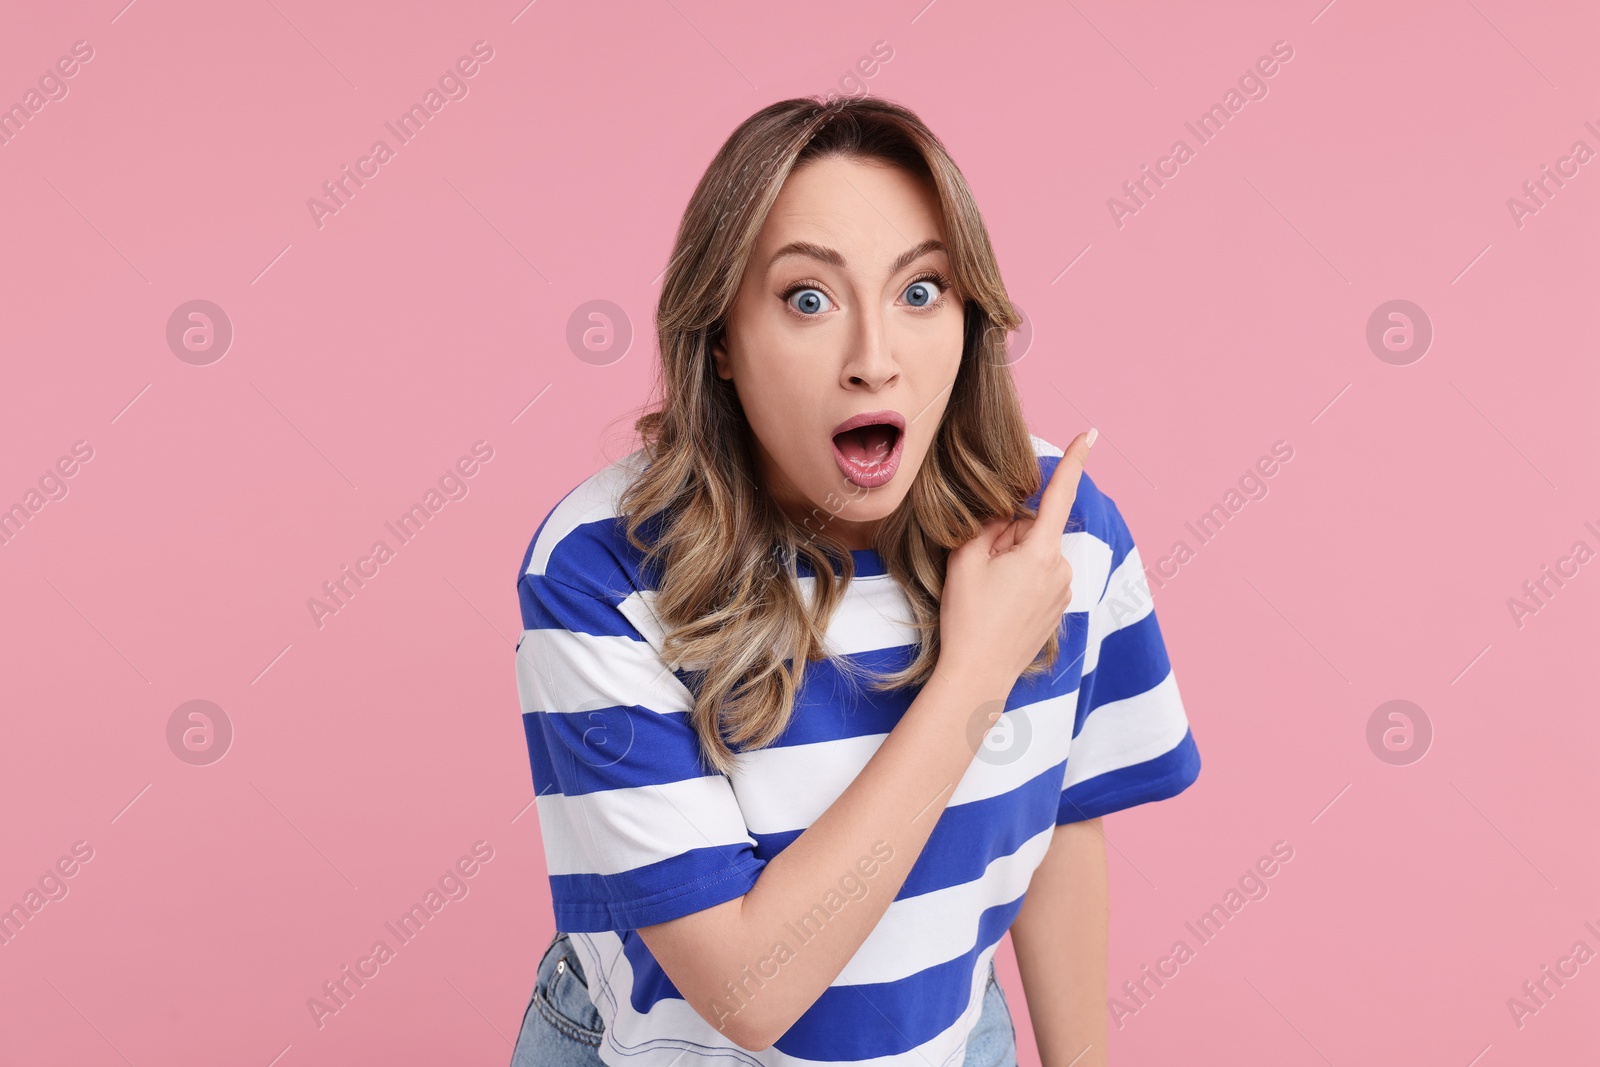 Photo of Portrait of surprised woman pointing at something on pink background